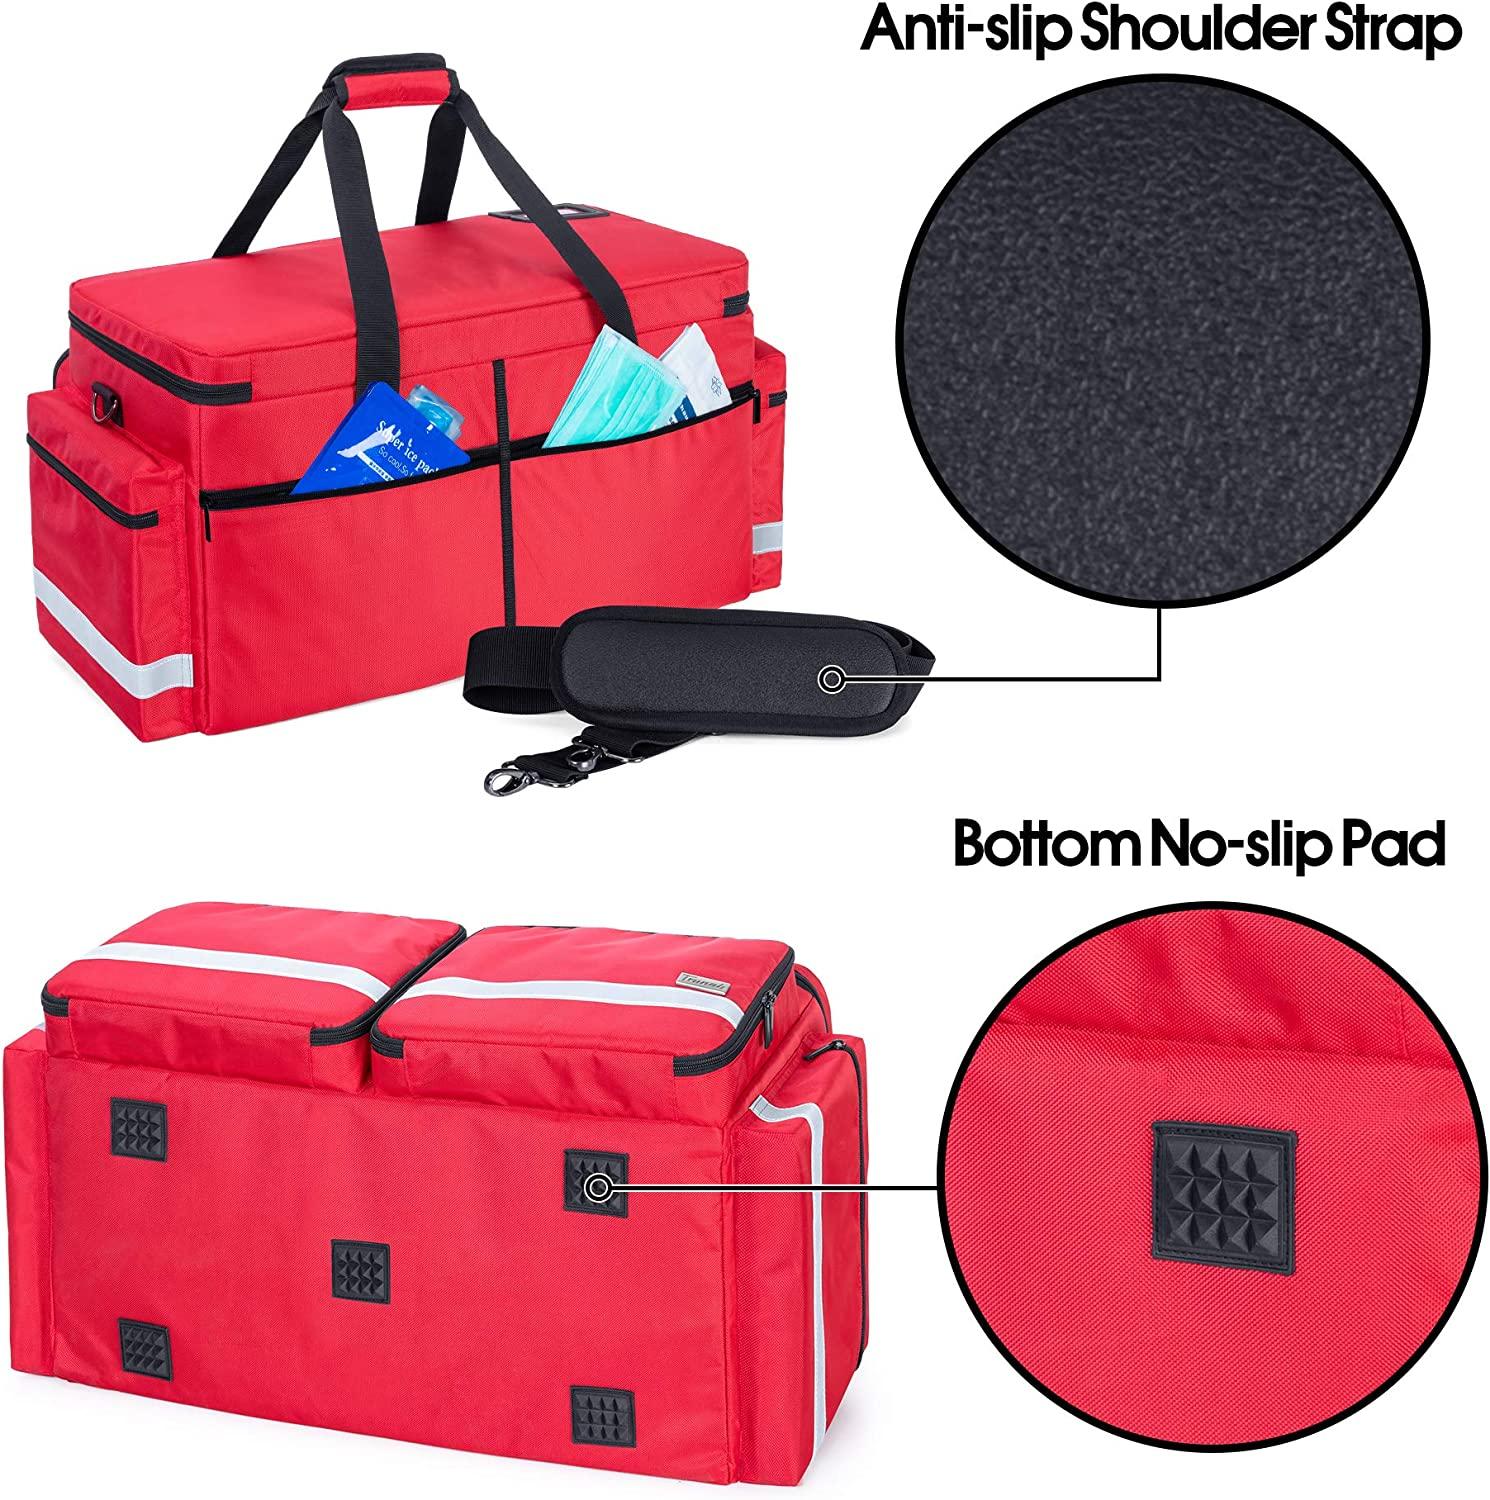  Trunab Emergency Responder Trauma Bag Empty, Professional First  Aid Kits Storage Medical Bag with Inner Dividers and Anti-Scratch Bottom,  Ideal for EMT, EMS, Paramedics, Red, Bag ONLY : Health & Household